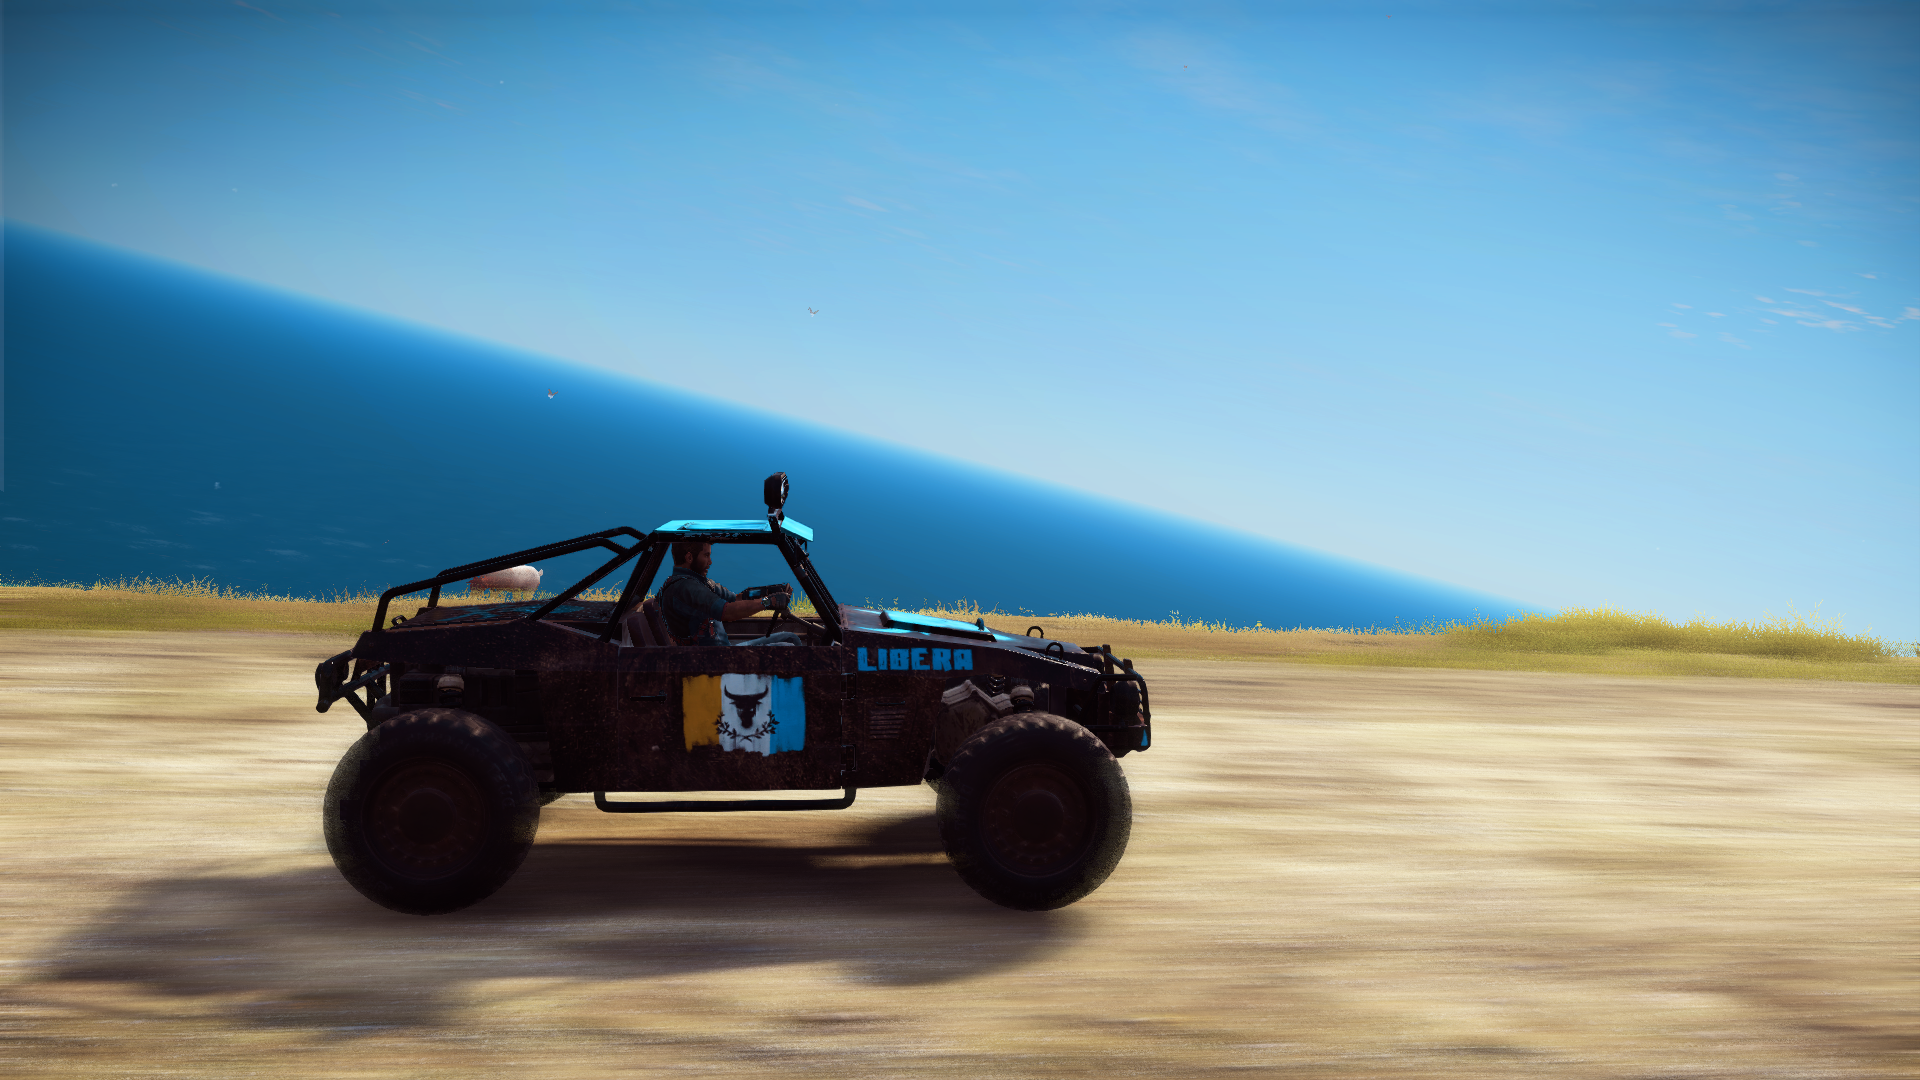 justcause3_2015120119eesh1.png